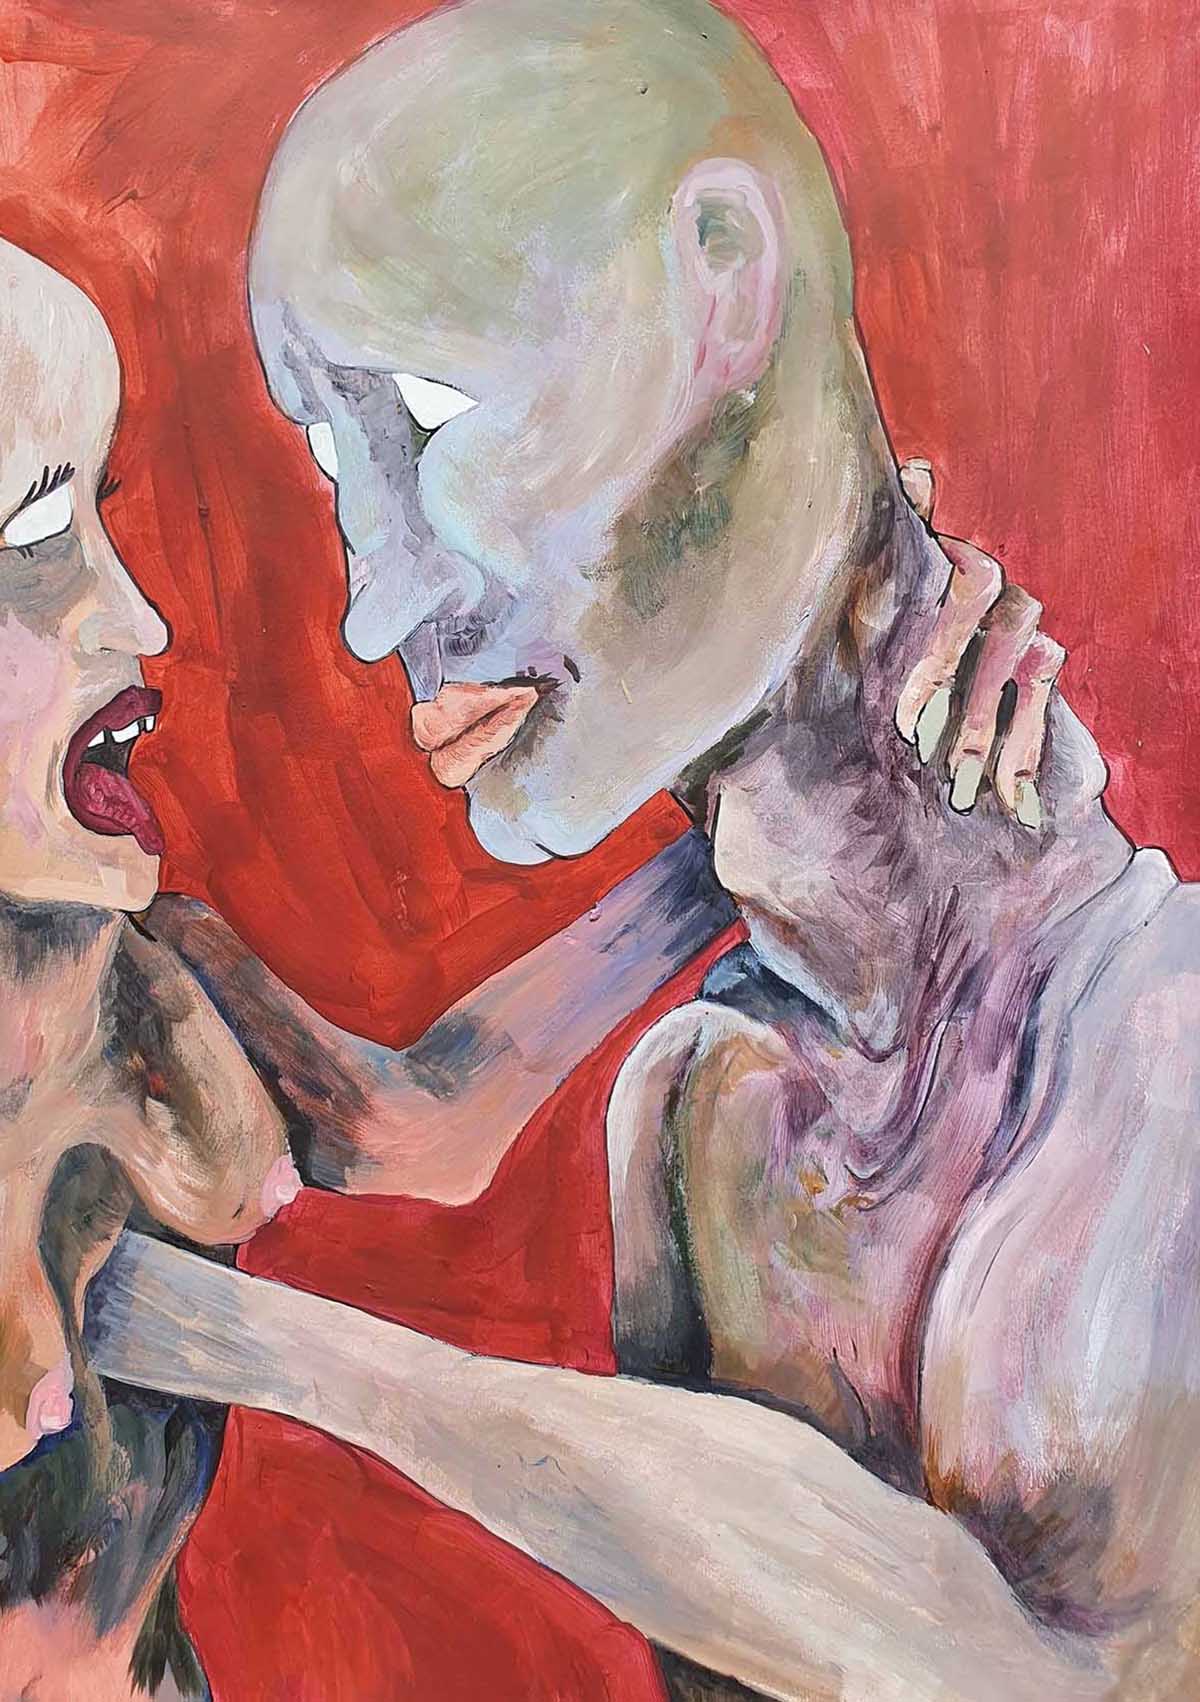 Painting of a man puncturing a woman's heart as she gasps